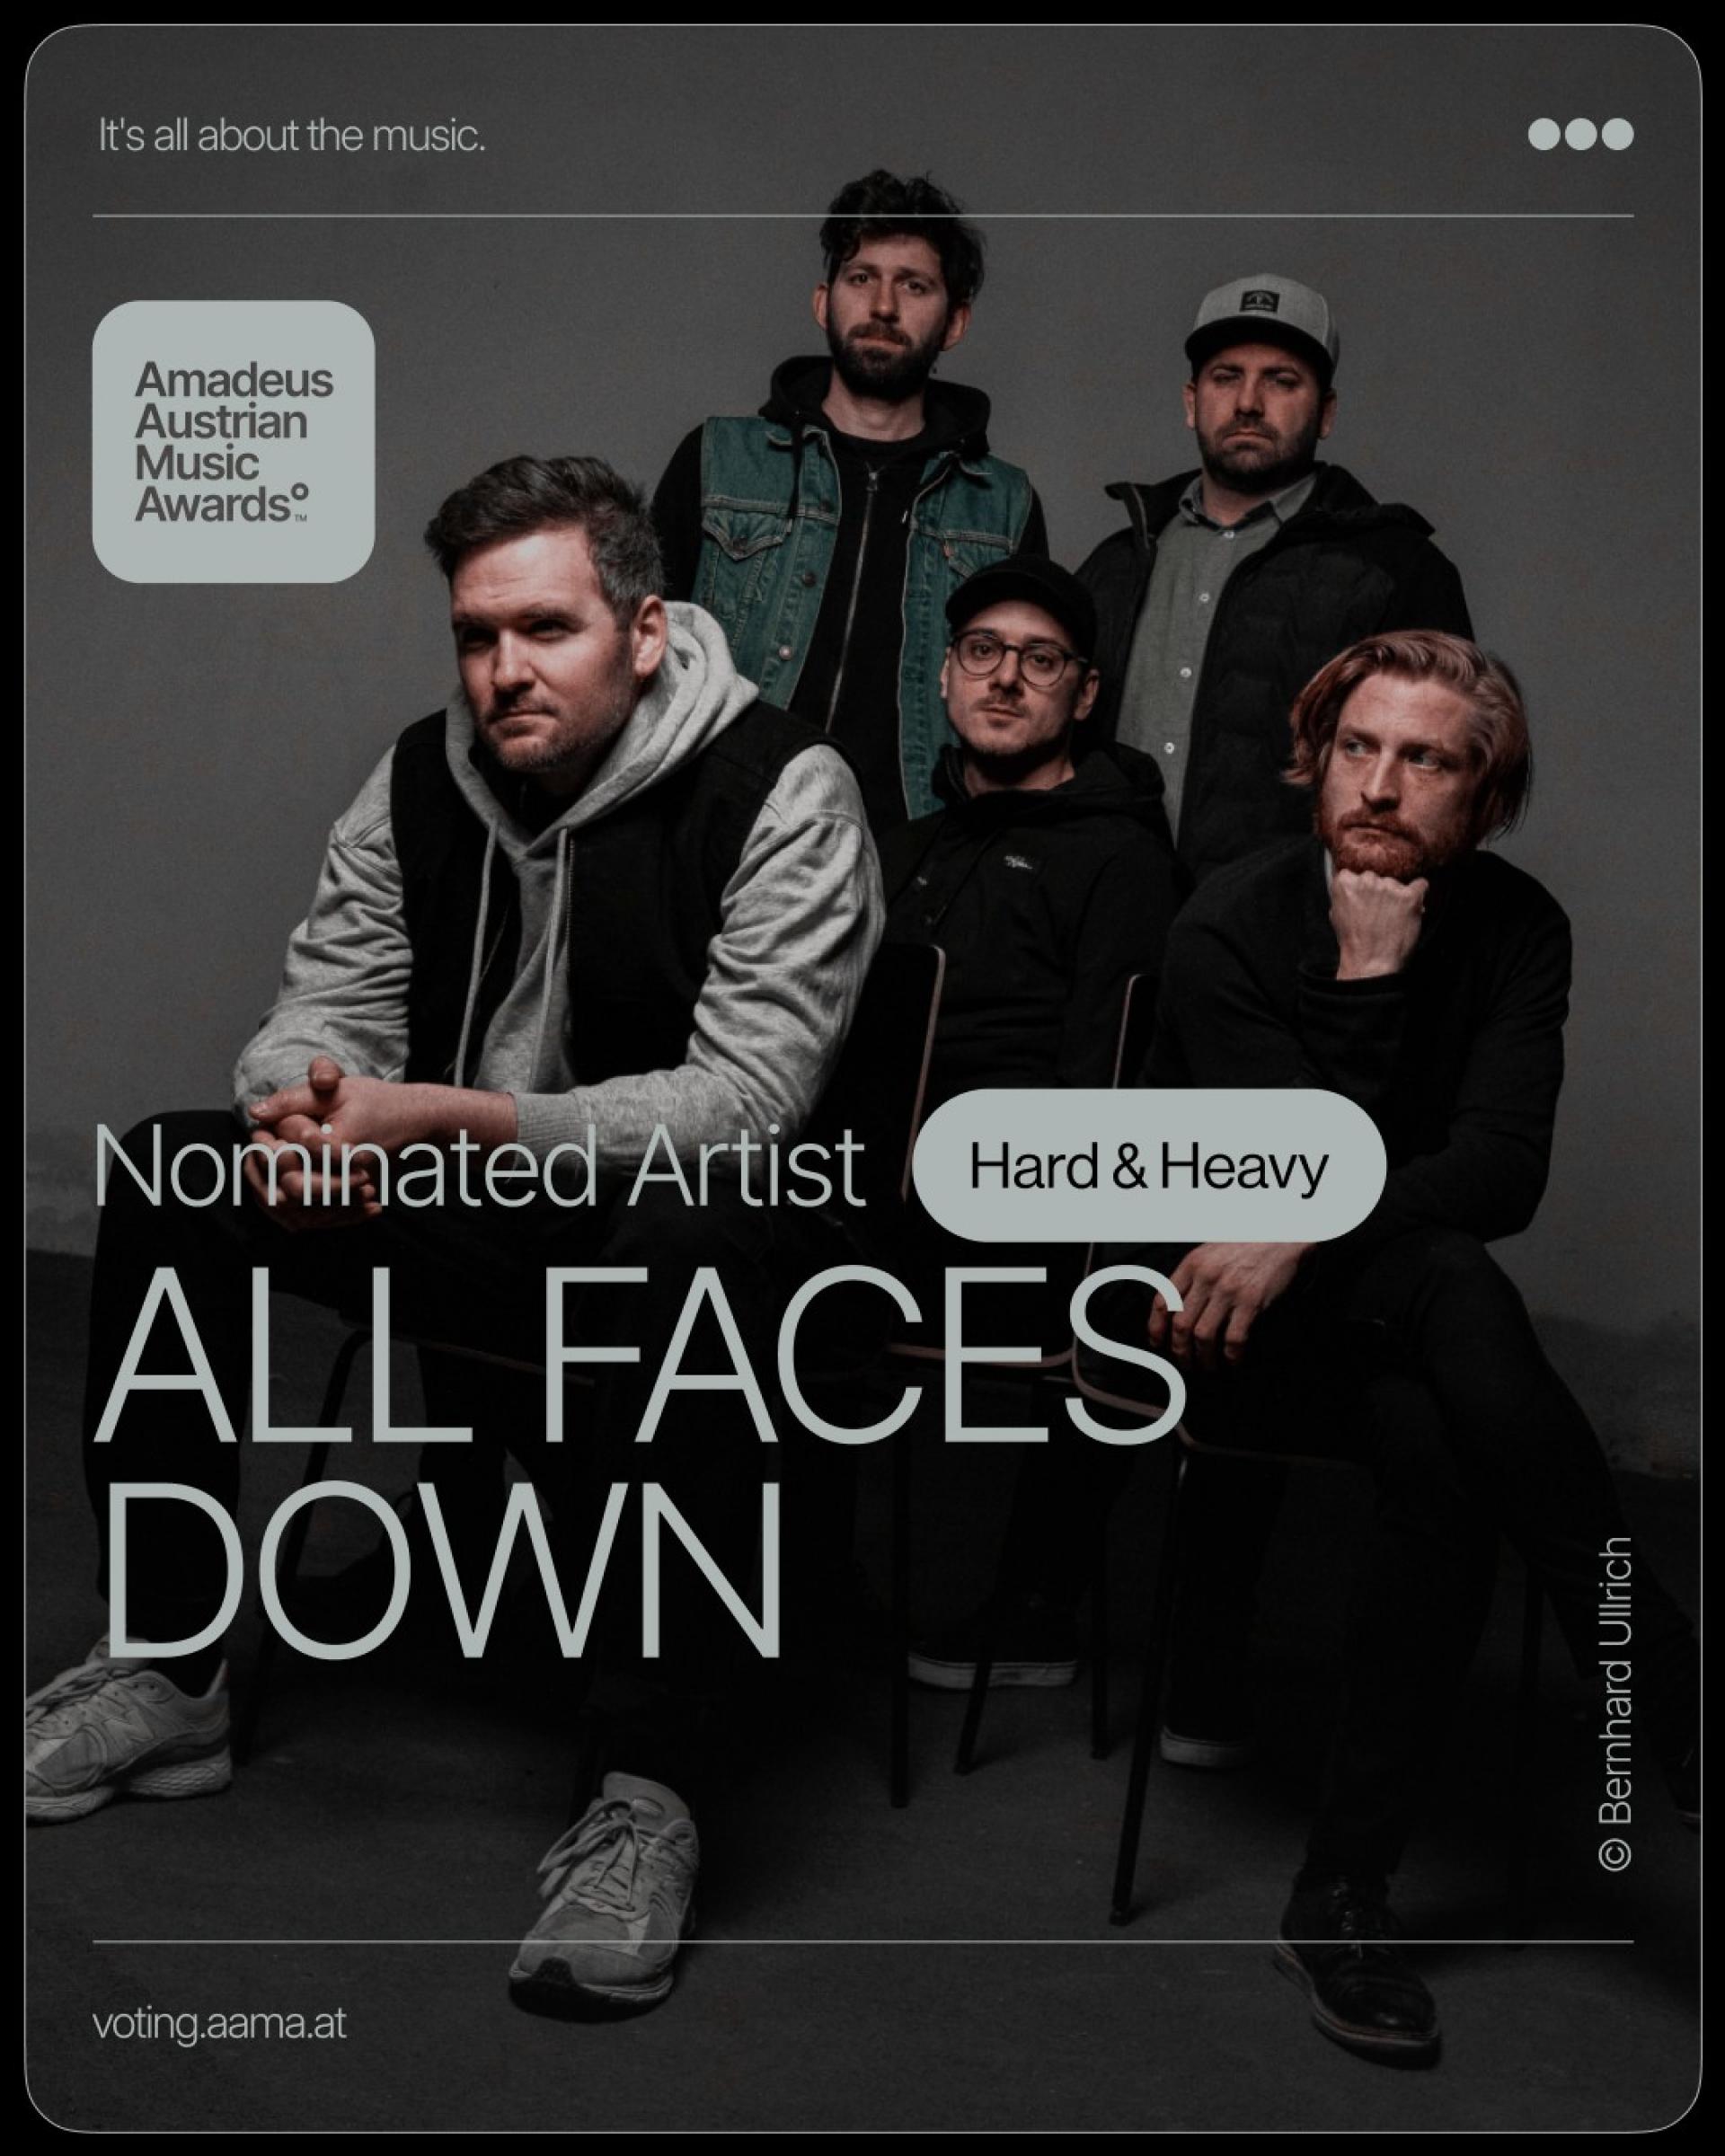 VOTE NOW for All Faces Down